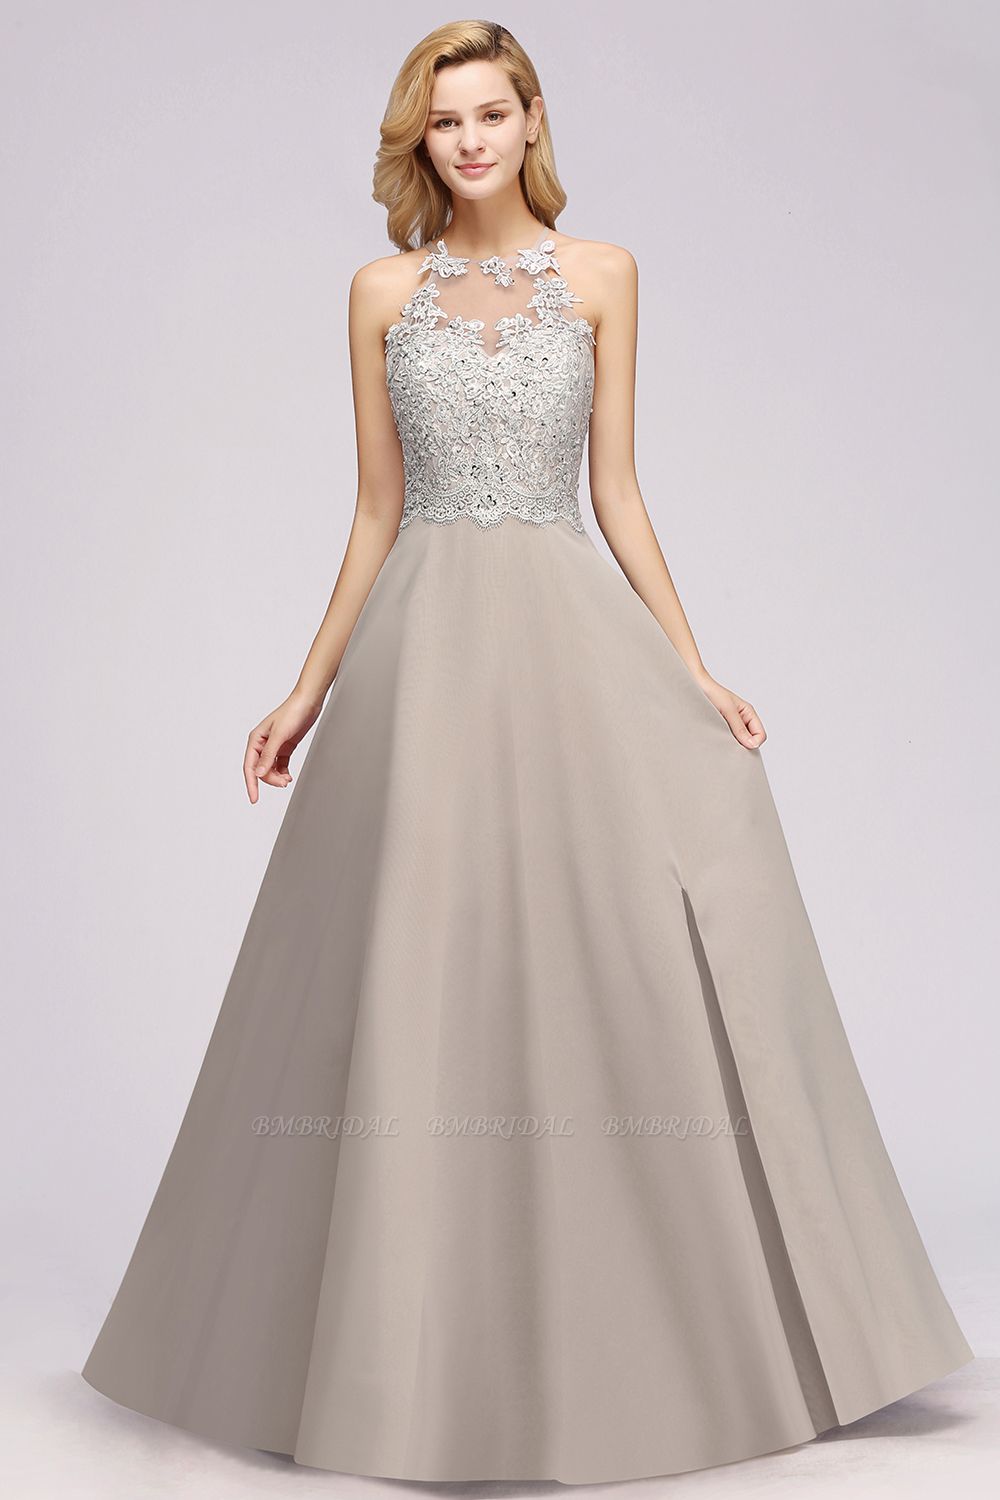 BMbridal Exquisite Sleeveless Slit Lace Affordable Bridesmaid Dresses with Beadings